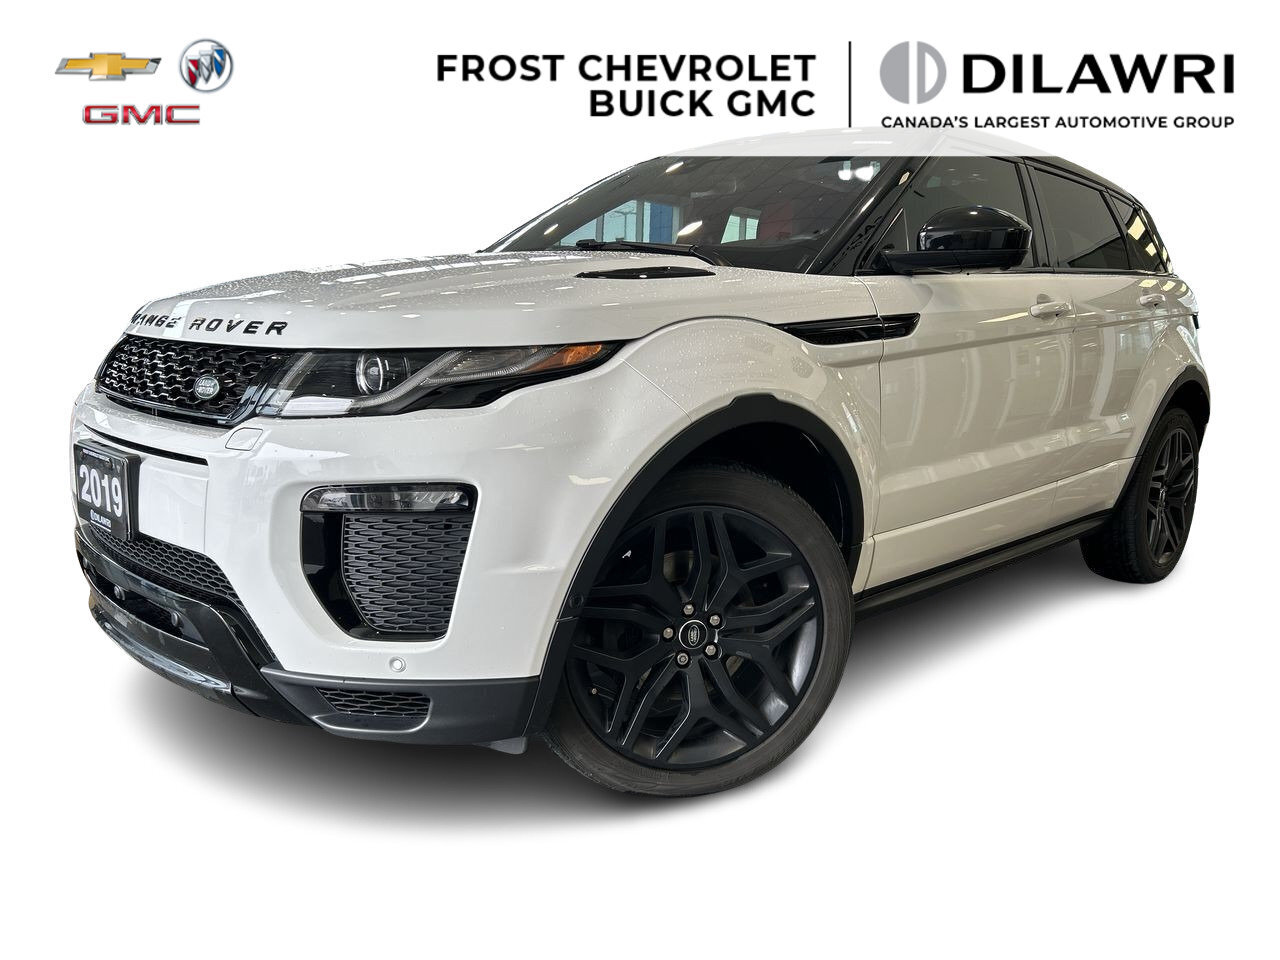 2019 Land Rover Range Rover Evoque HSE DYNAMIC Clean CarFax|1-Owner|Memore Seats|Nav|